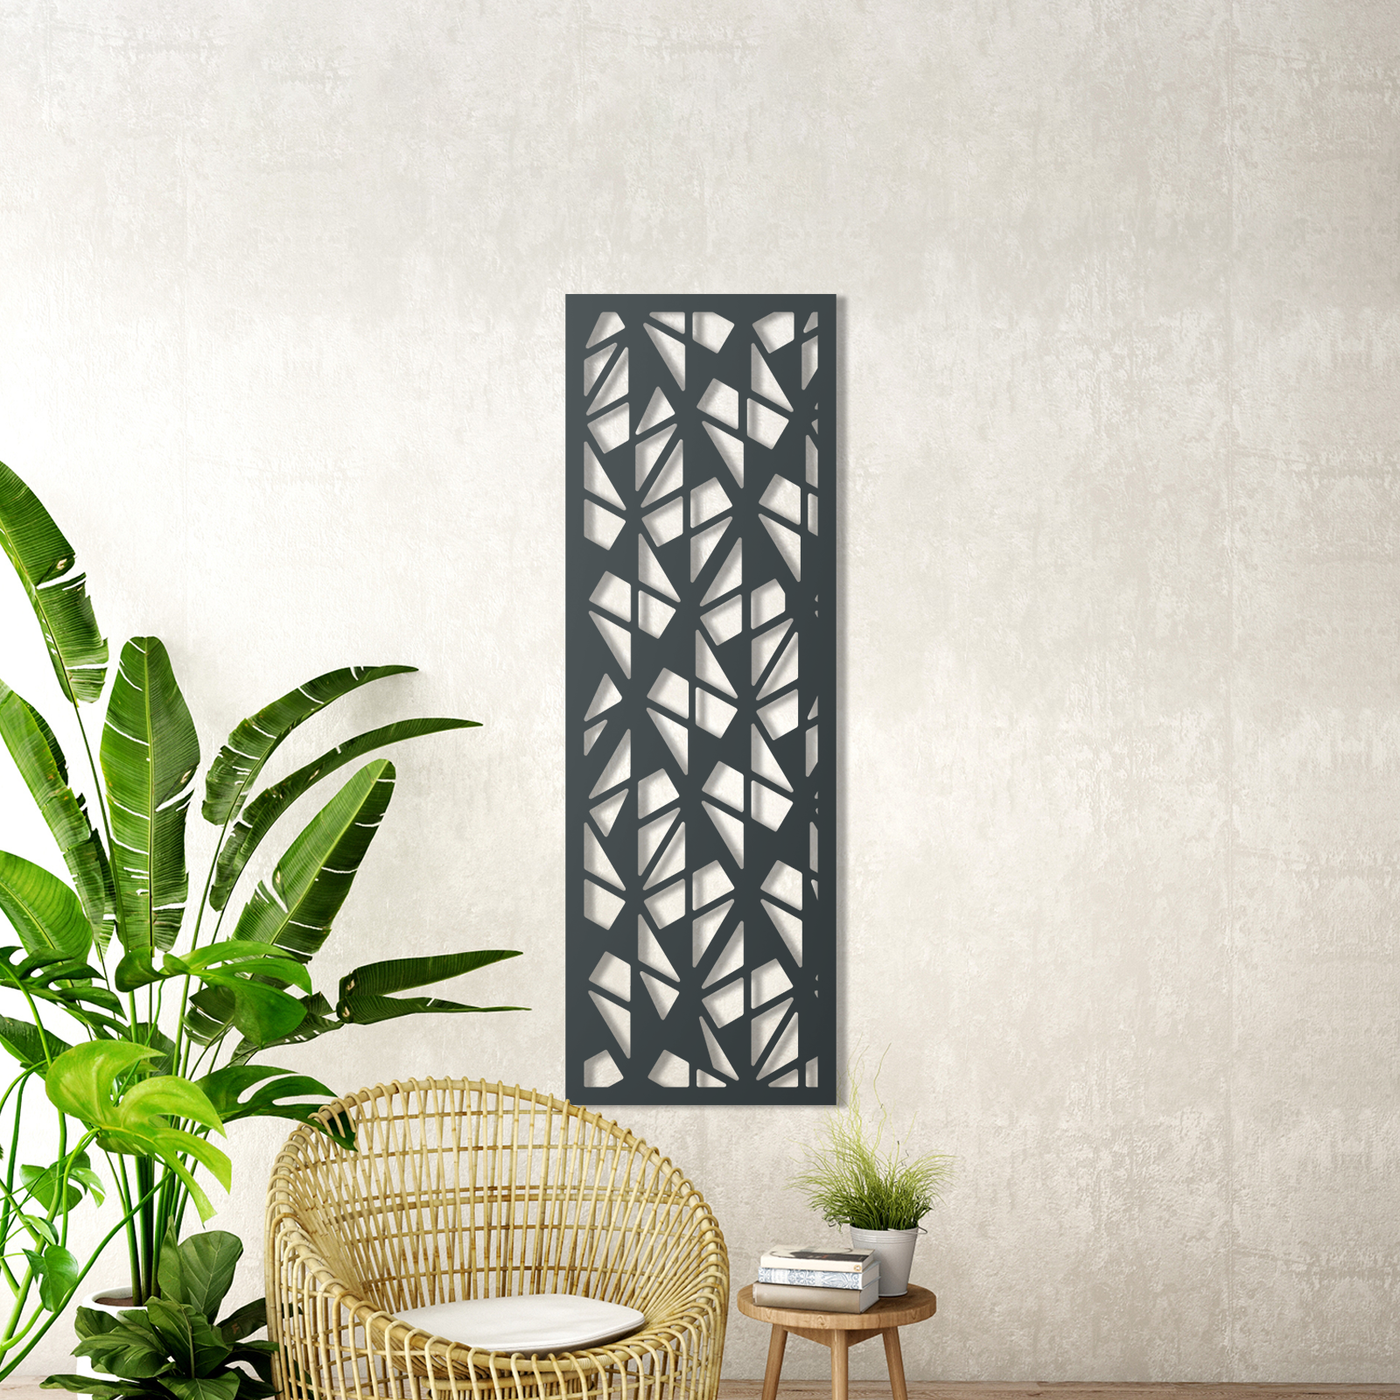 Hall of Mirrors Metal Screen: Perfect for Enhancing Your Outdoor Living Space